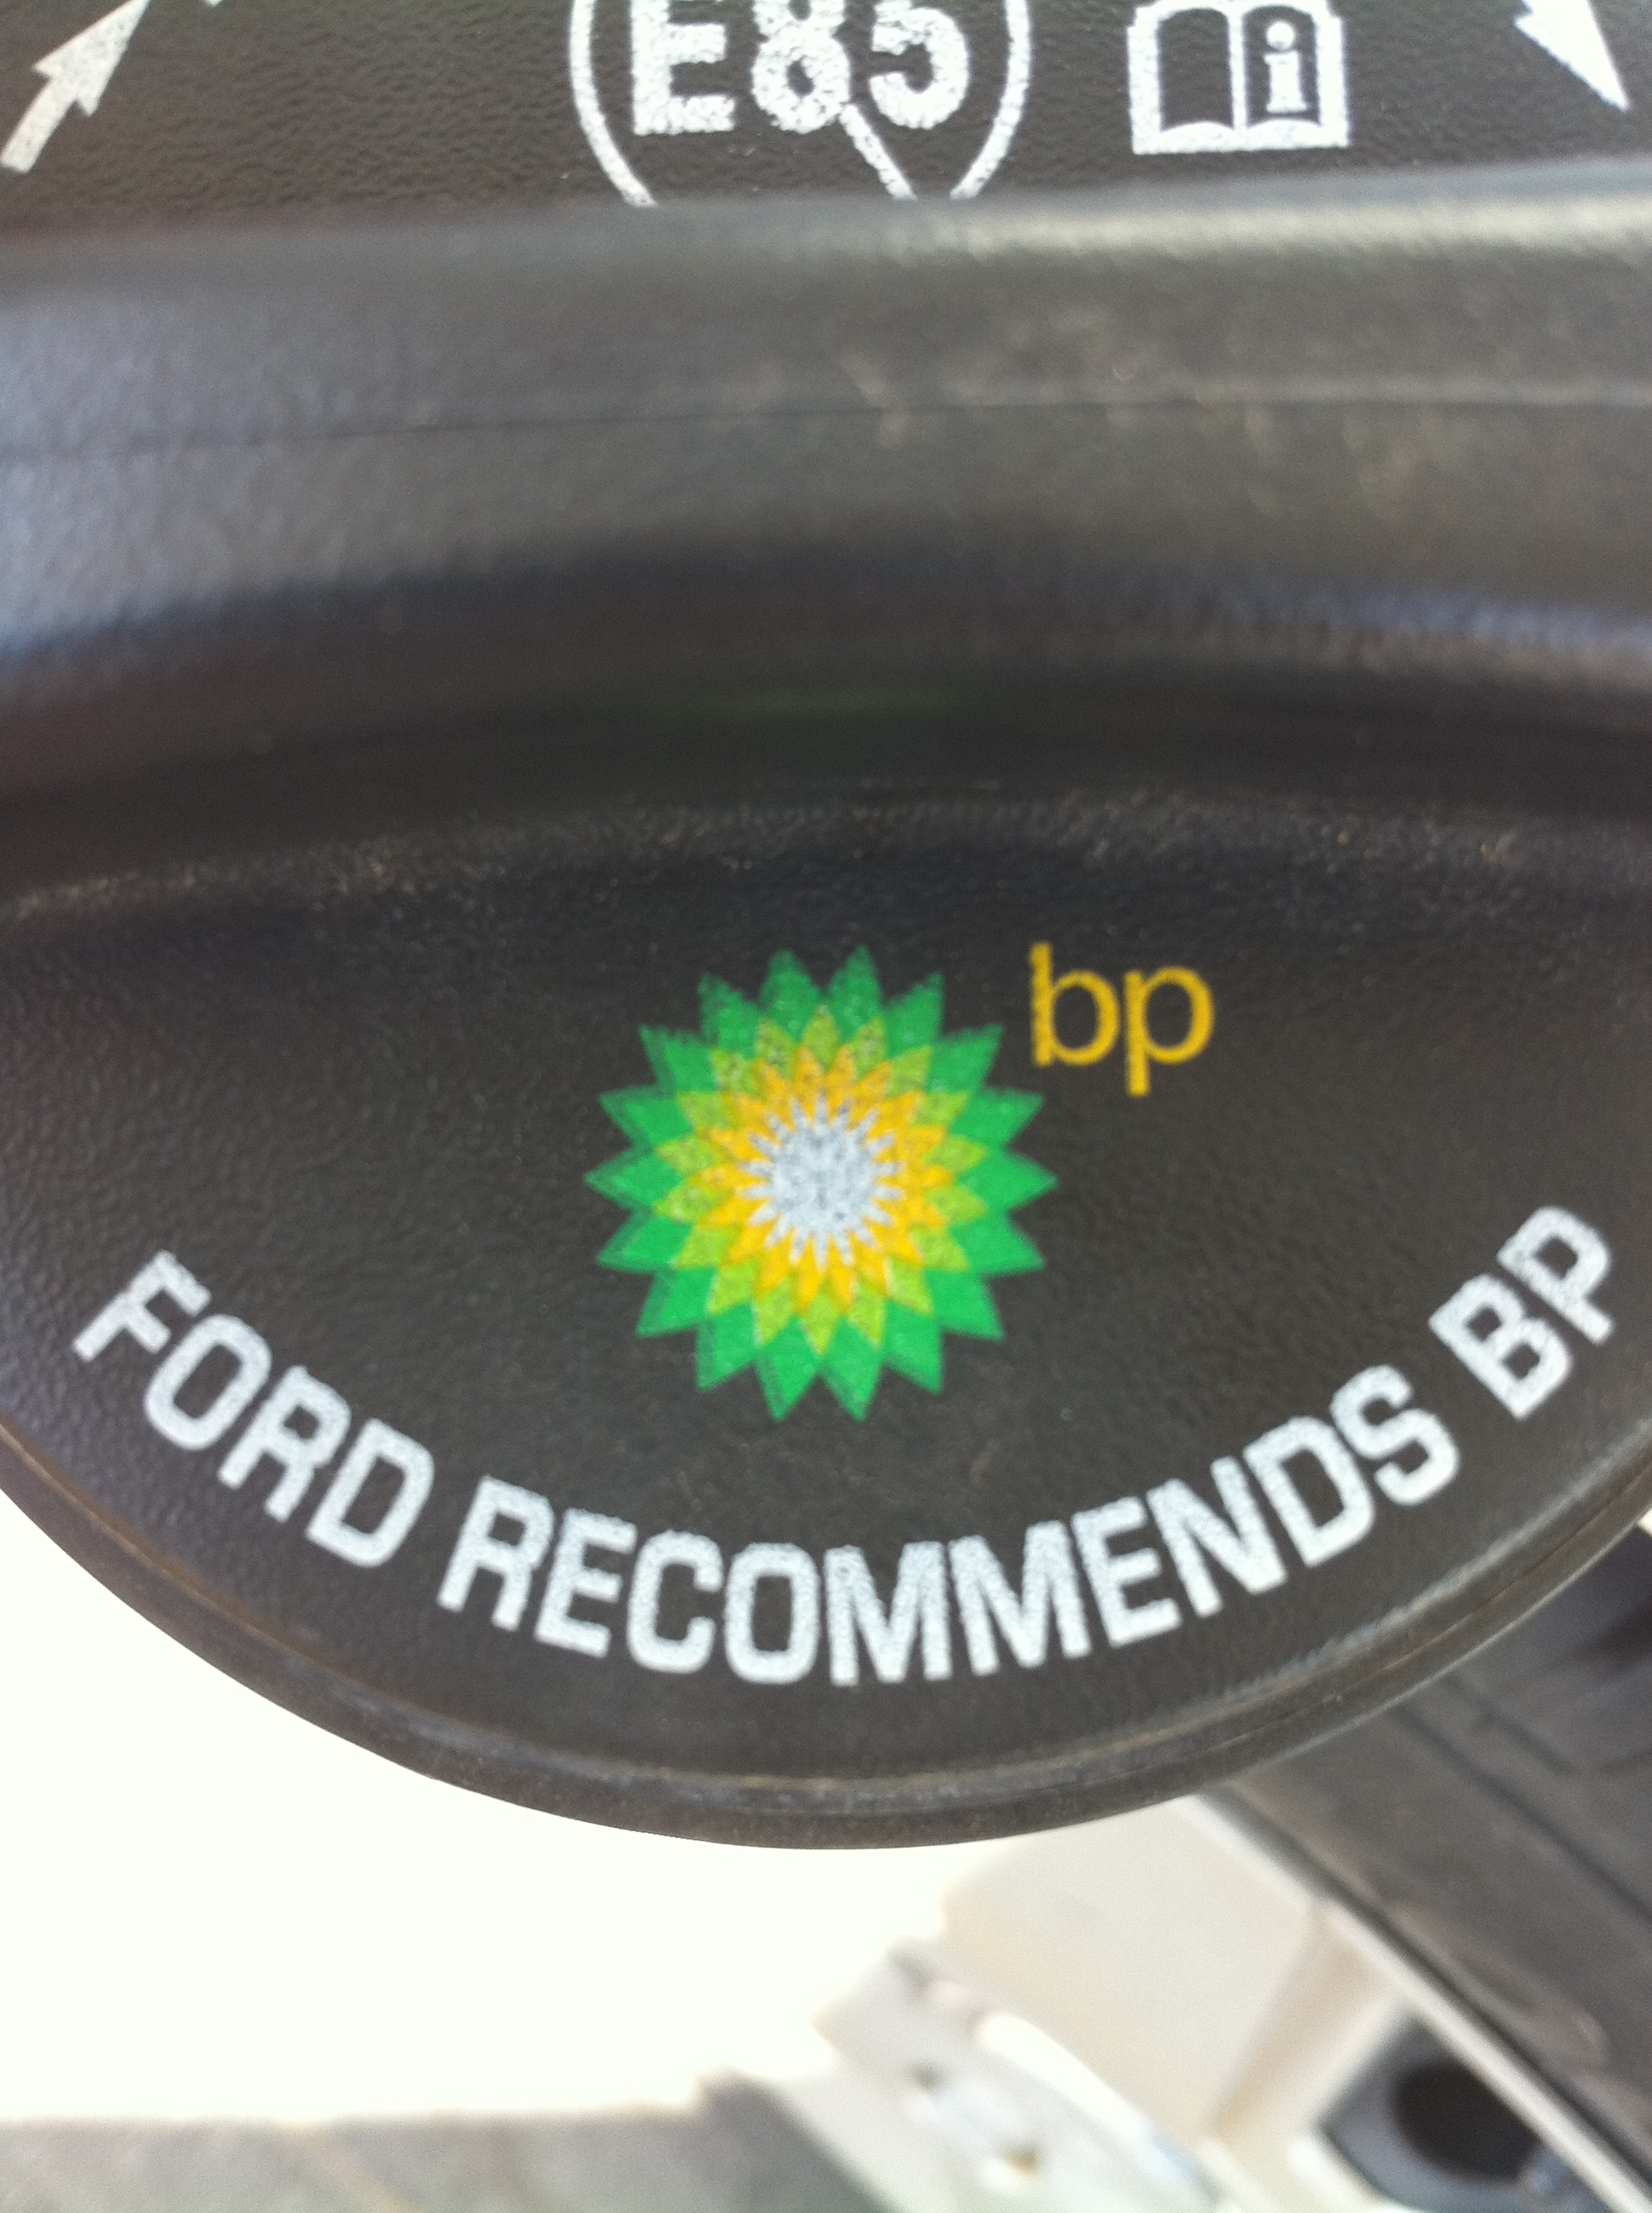 Ford recommends BP? You mean the retards that fucked up the already shitty Gulf of Mexico? 